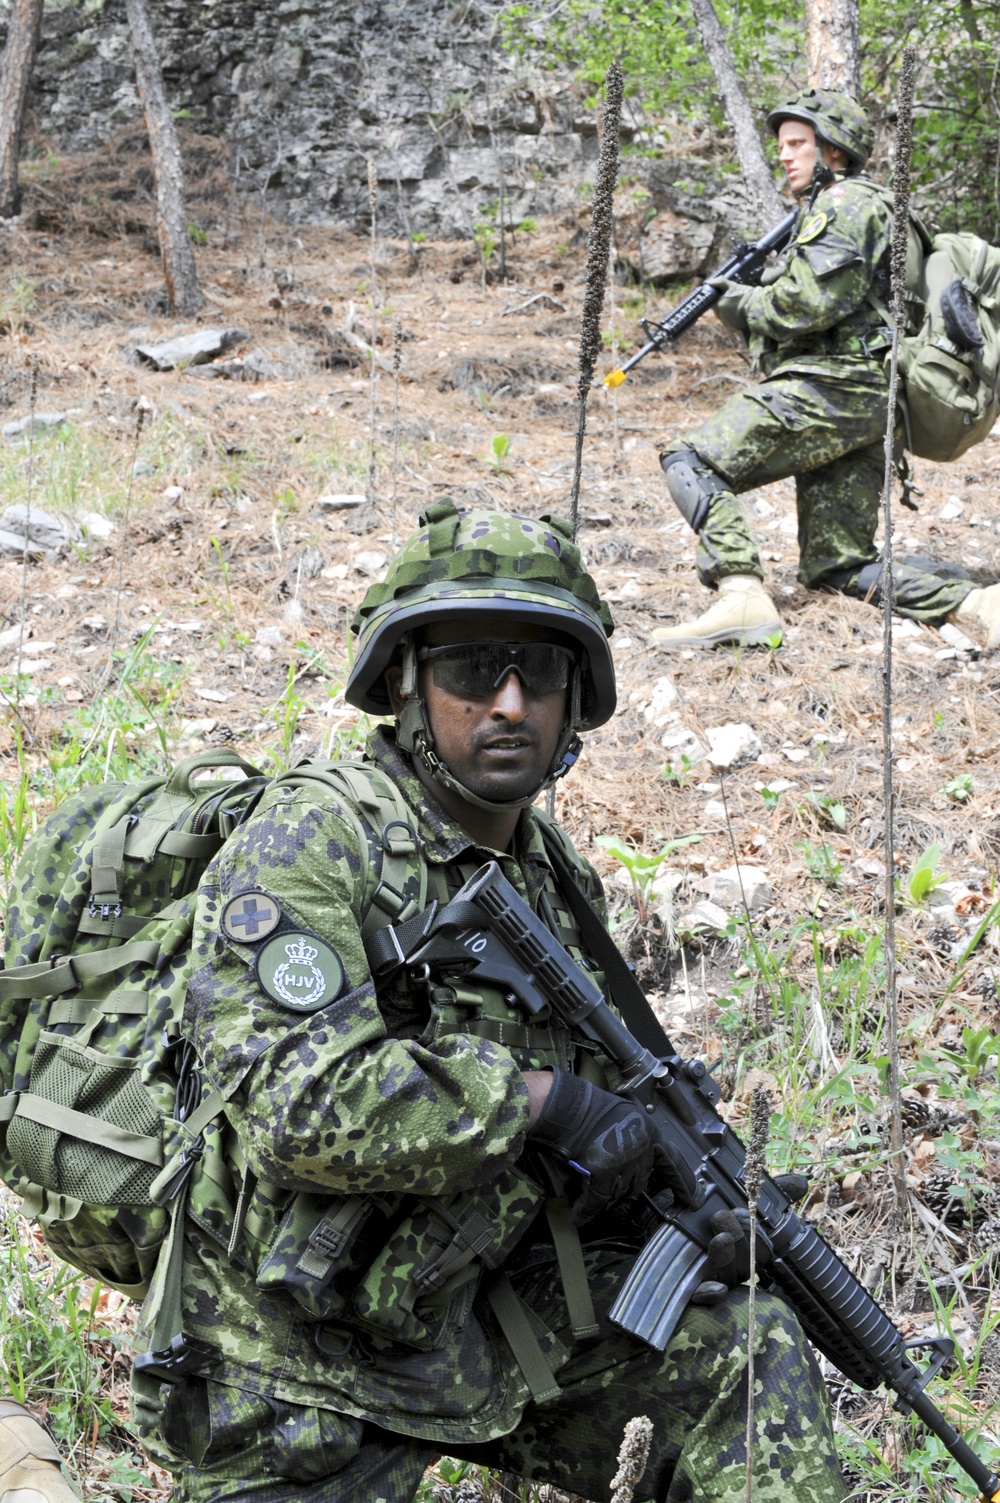 Danish Home Guard participates in Golden Coyote exercise for first time